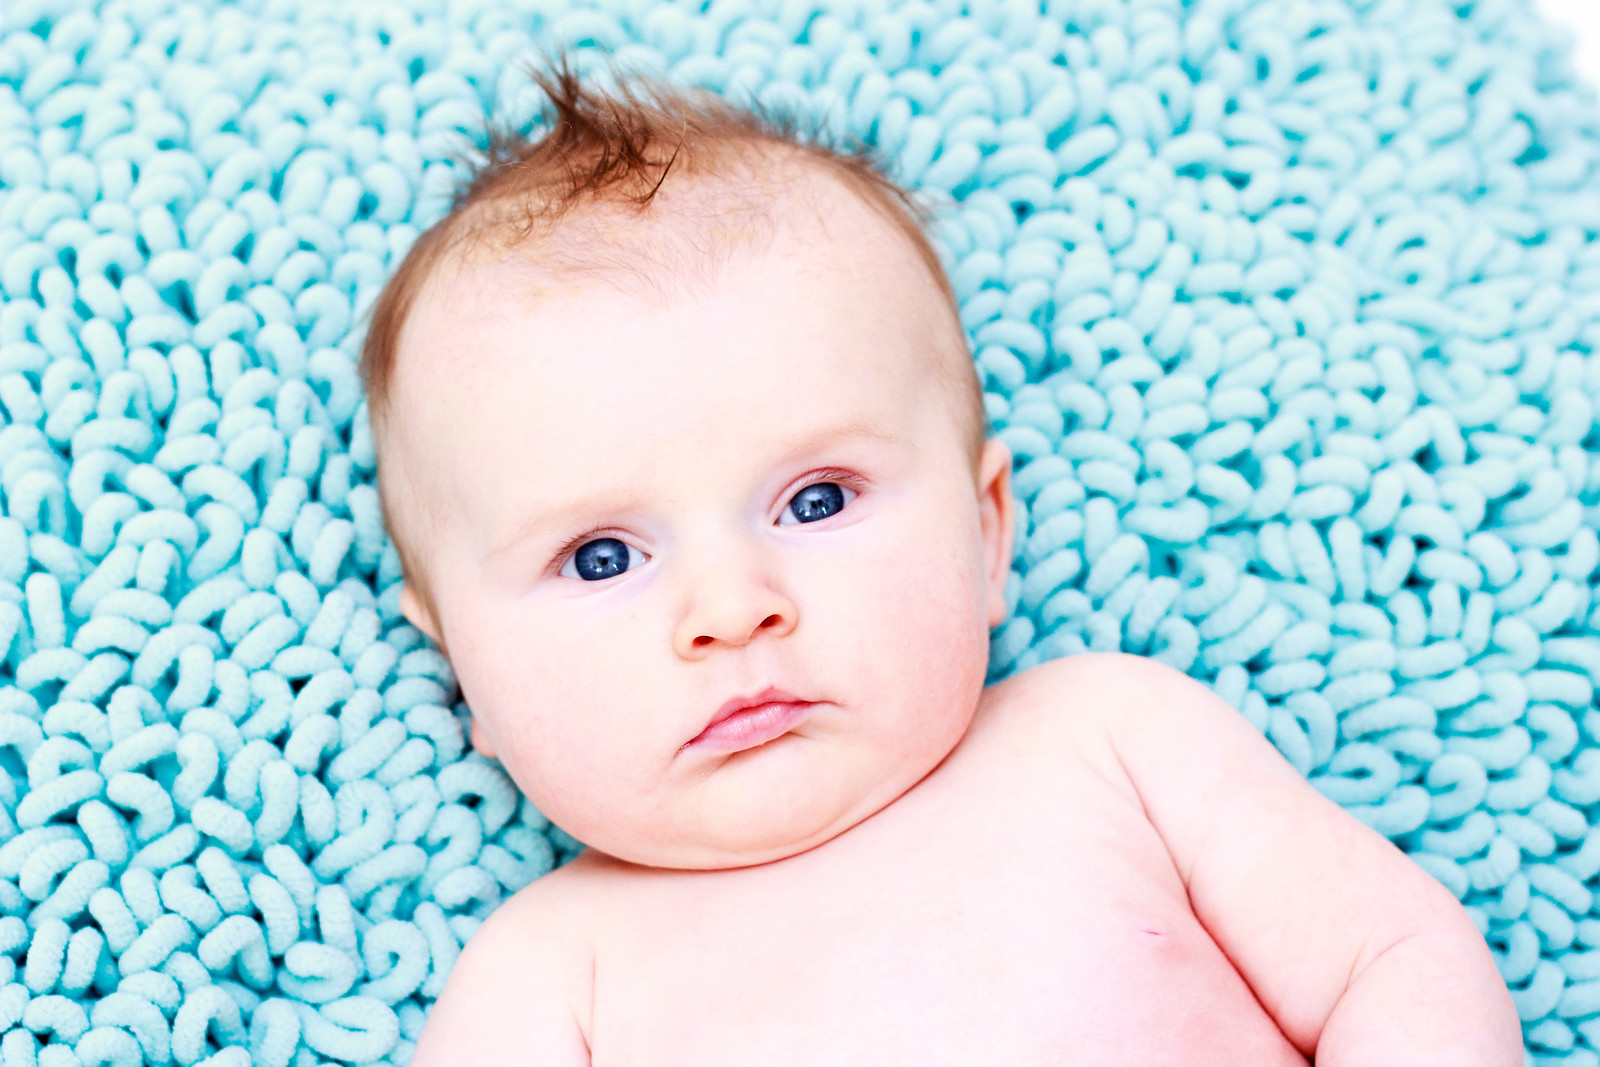 Baby with blue eyes portrait photography